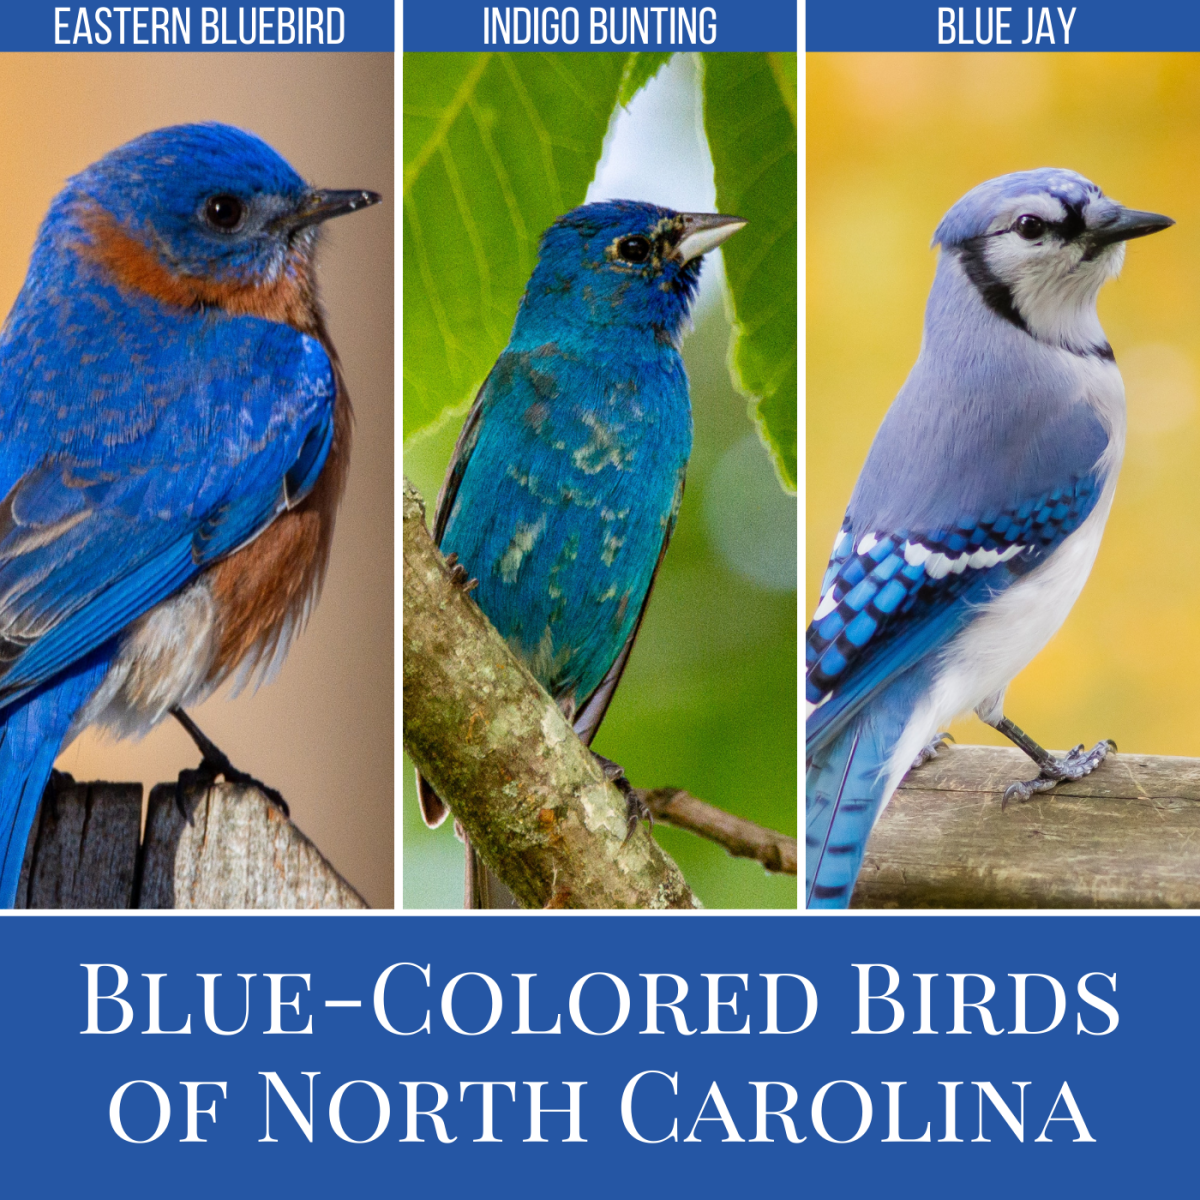 Learn more about these three vivid birds found in North Carolina, including their identifying features, diets, and songs.